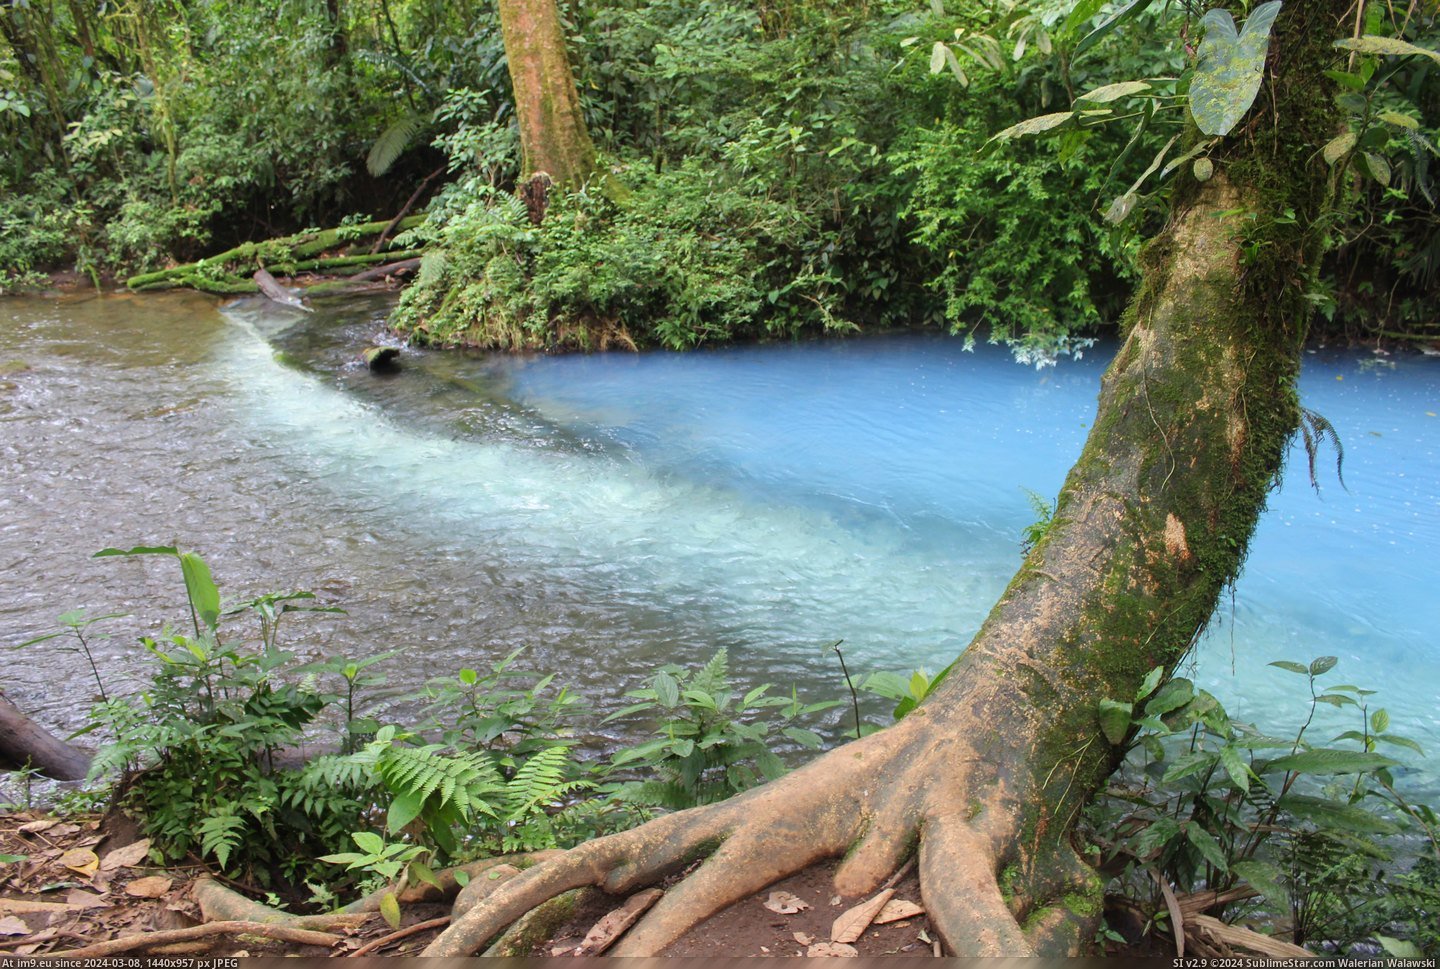 #5184x3456 #Rio #Costa #Celeste #Birthplace #Rica #Waters #Unbelievable [Earthporn] The birthplace of the unbelievable waters of the Rio Celeste, Costa Rica  [5184x3456] Pic. (Image of album My r/EARTHPORN favs))